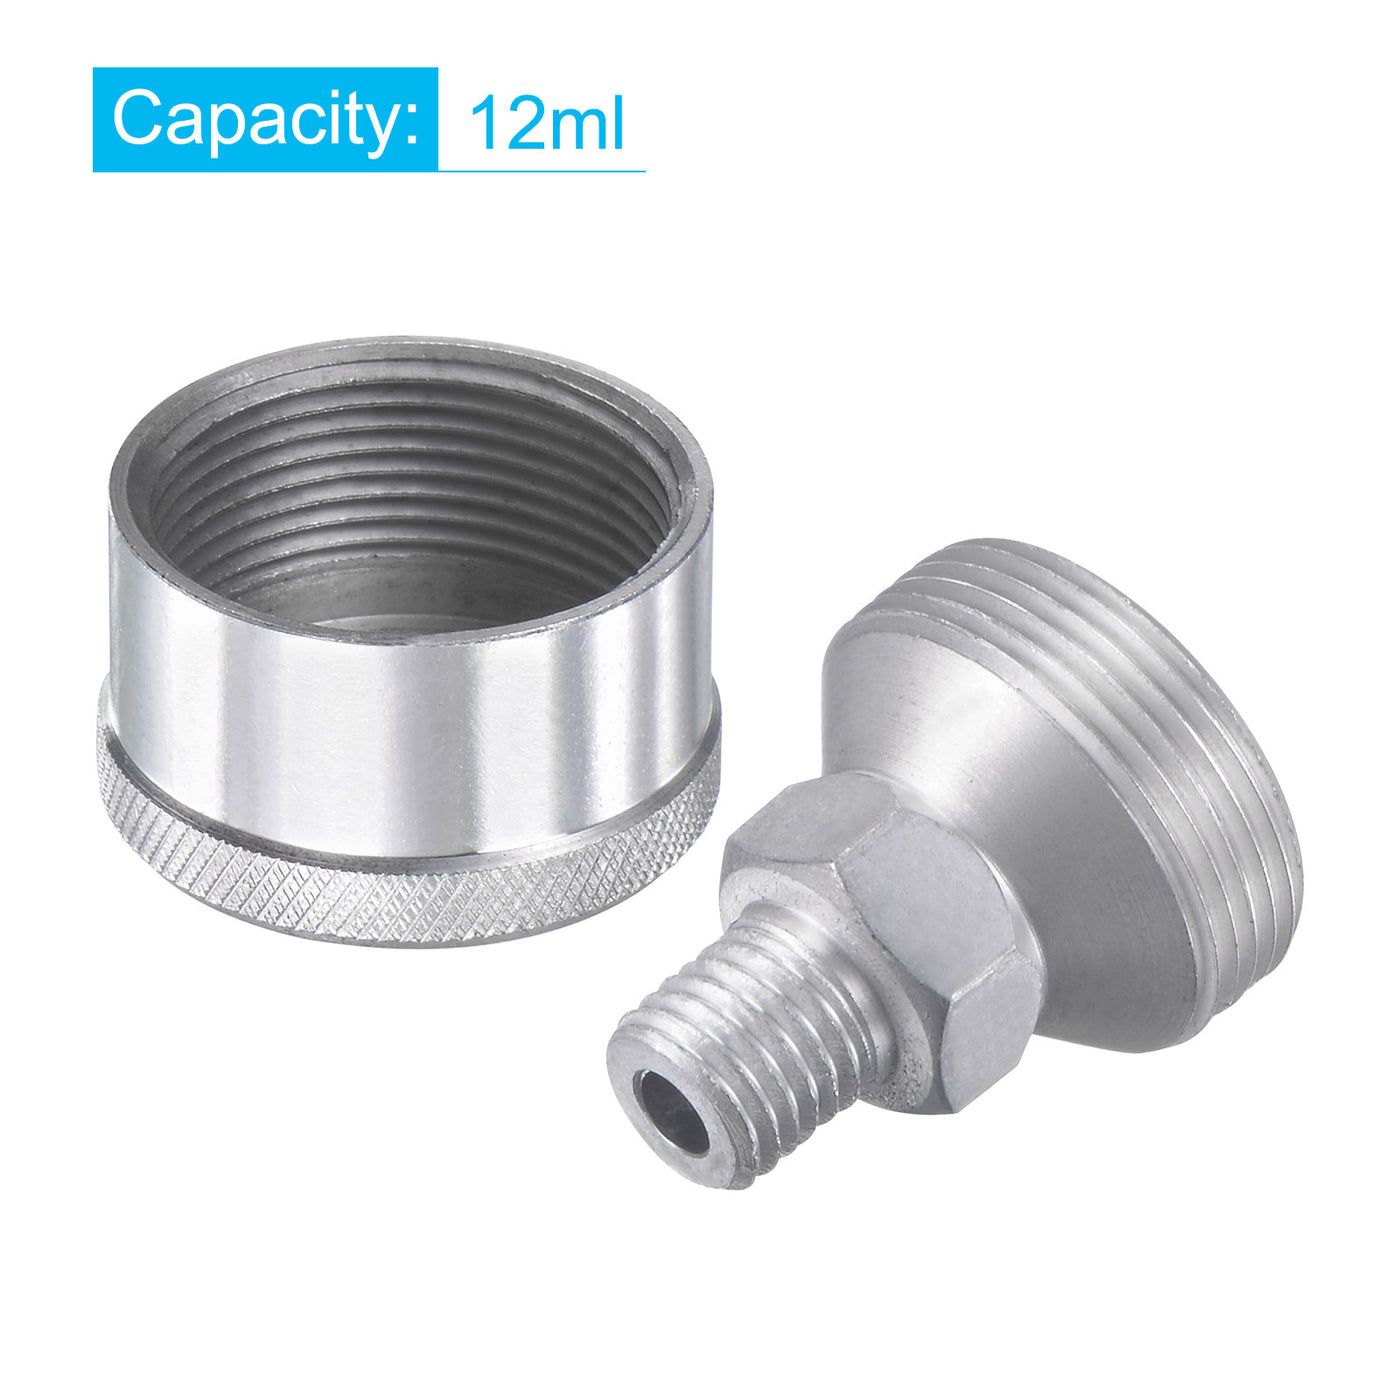 Uxcell Uxcell Machine Parts M10x1 Male Thread 1.5ml Grease Oil Cup Cap Aluminium Silver